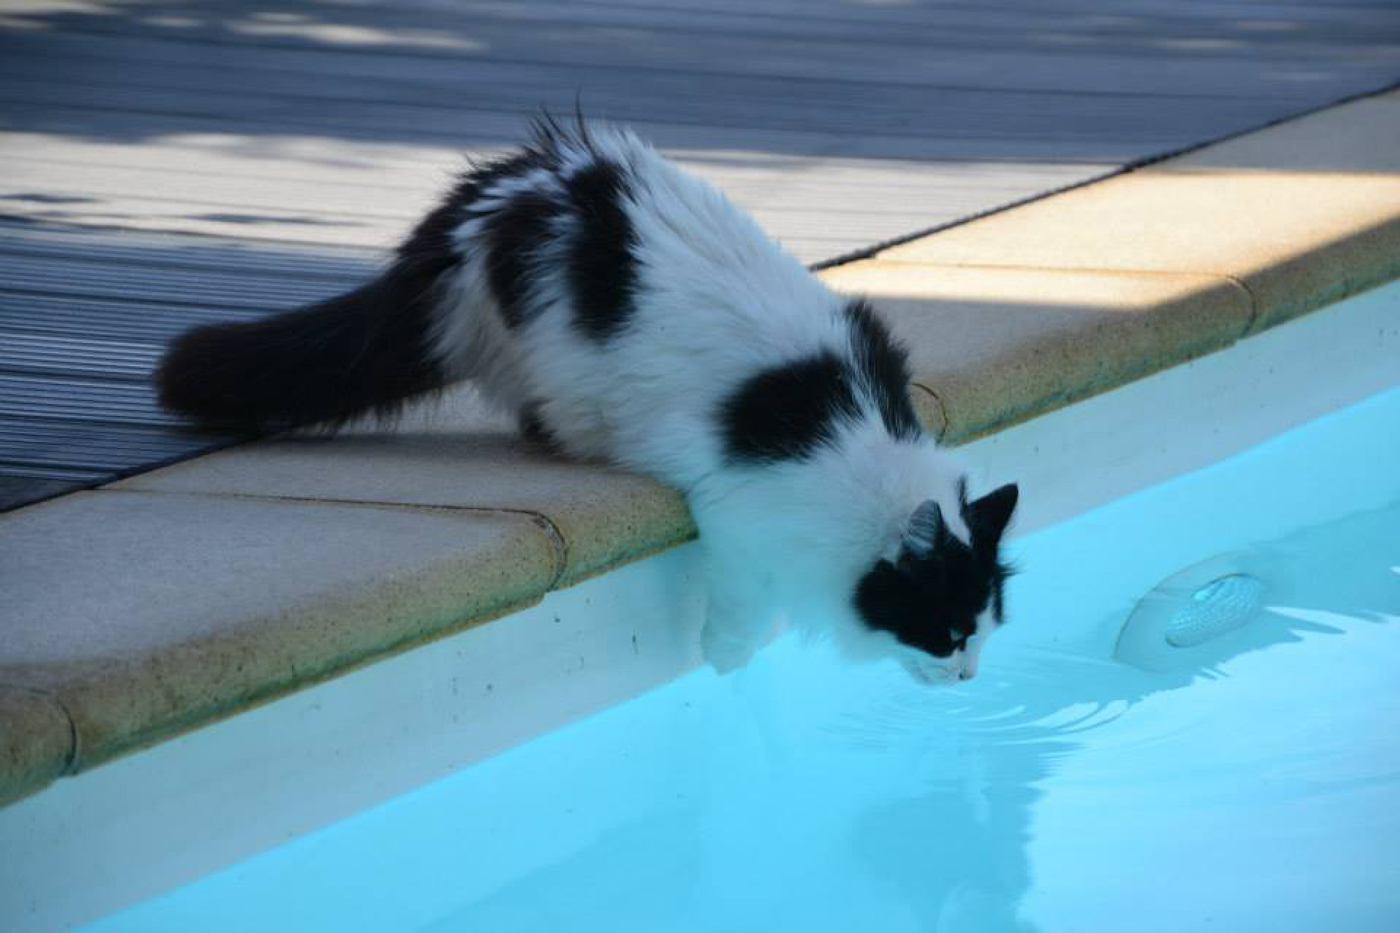 A cat leaning over the edge of a pool to investigate the water